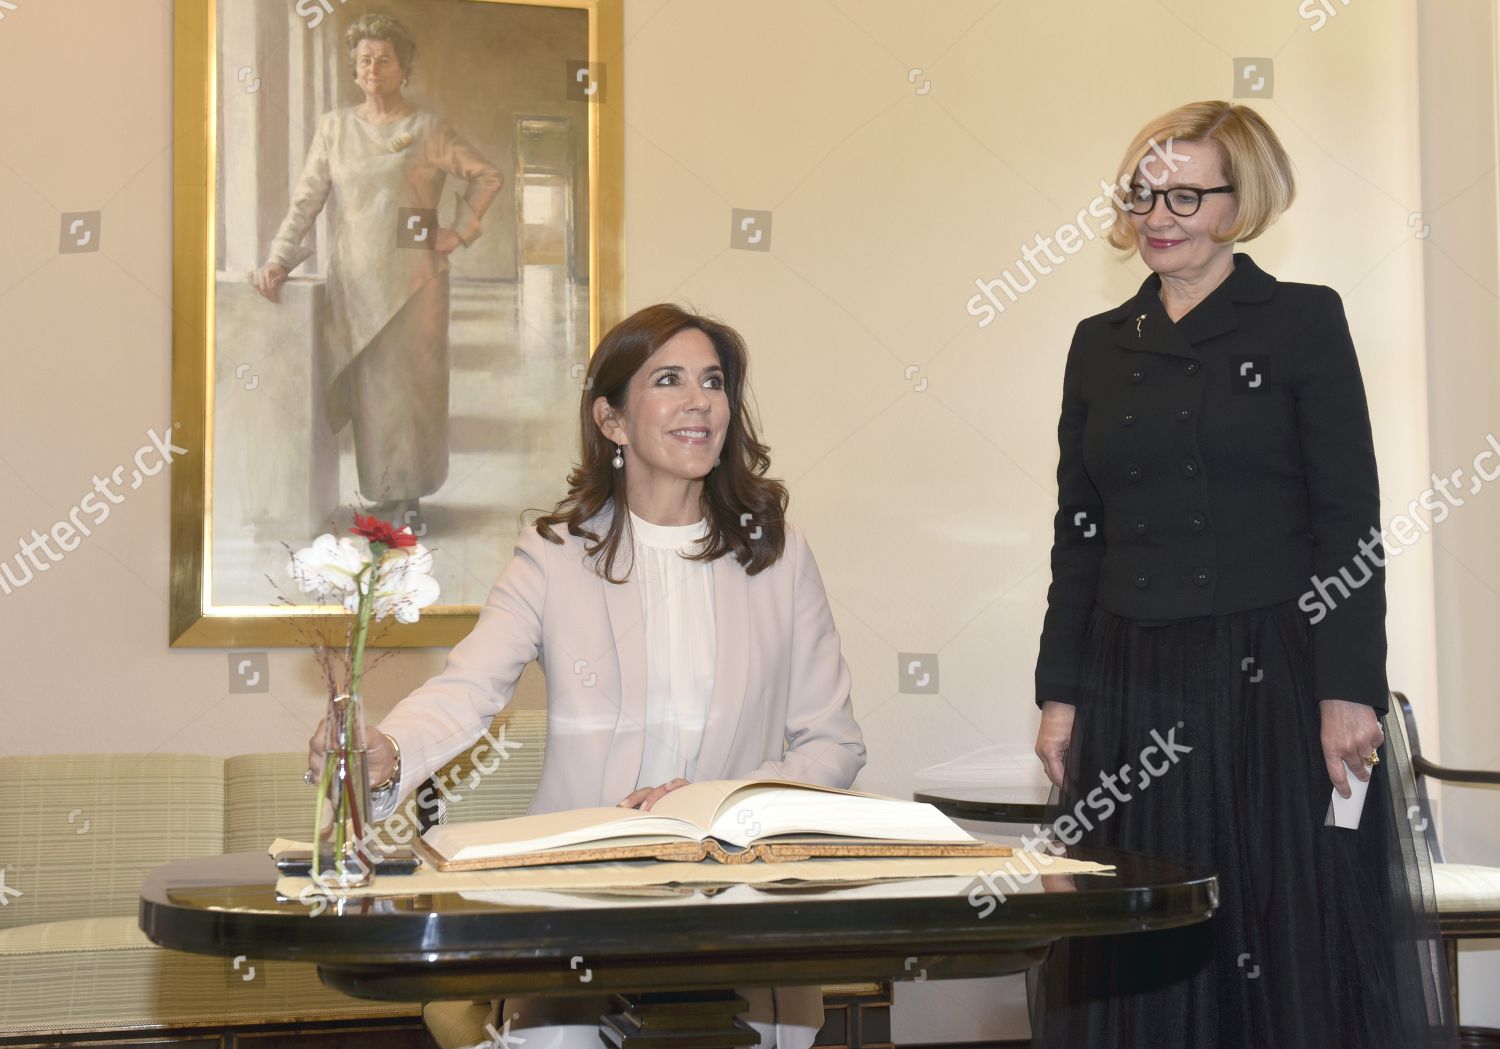 crown-princess-mary-visit-to-finland-shutterstock-editorial-9881095d.jpg